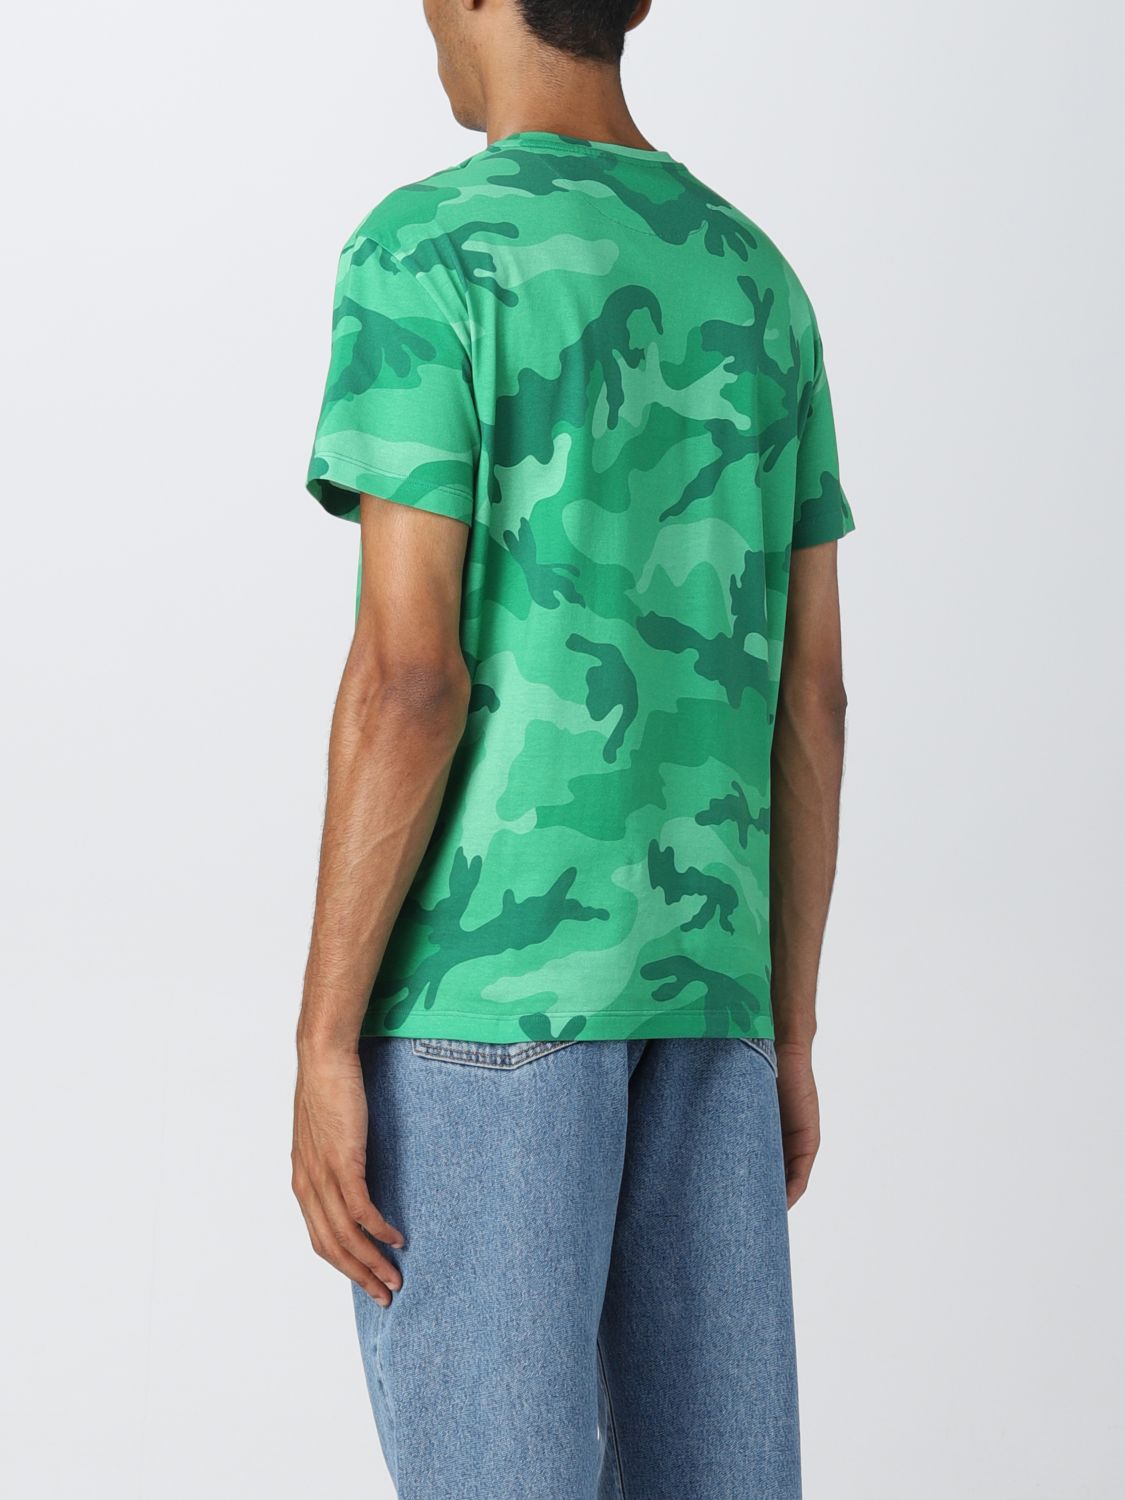 Parcel Glow skrot VALENTINO: camouflage t-shirt with logo - Green | Valentino t-shirt  1V3MG10V8ML online on GIGLIO.COM